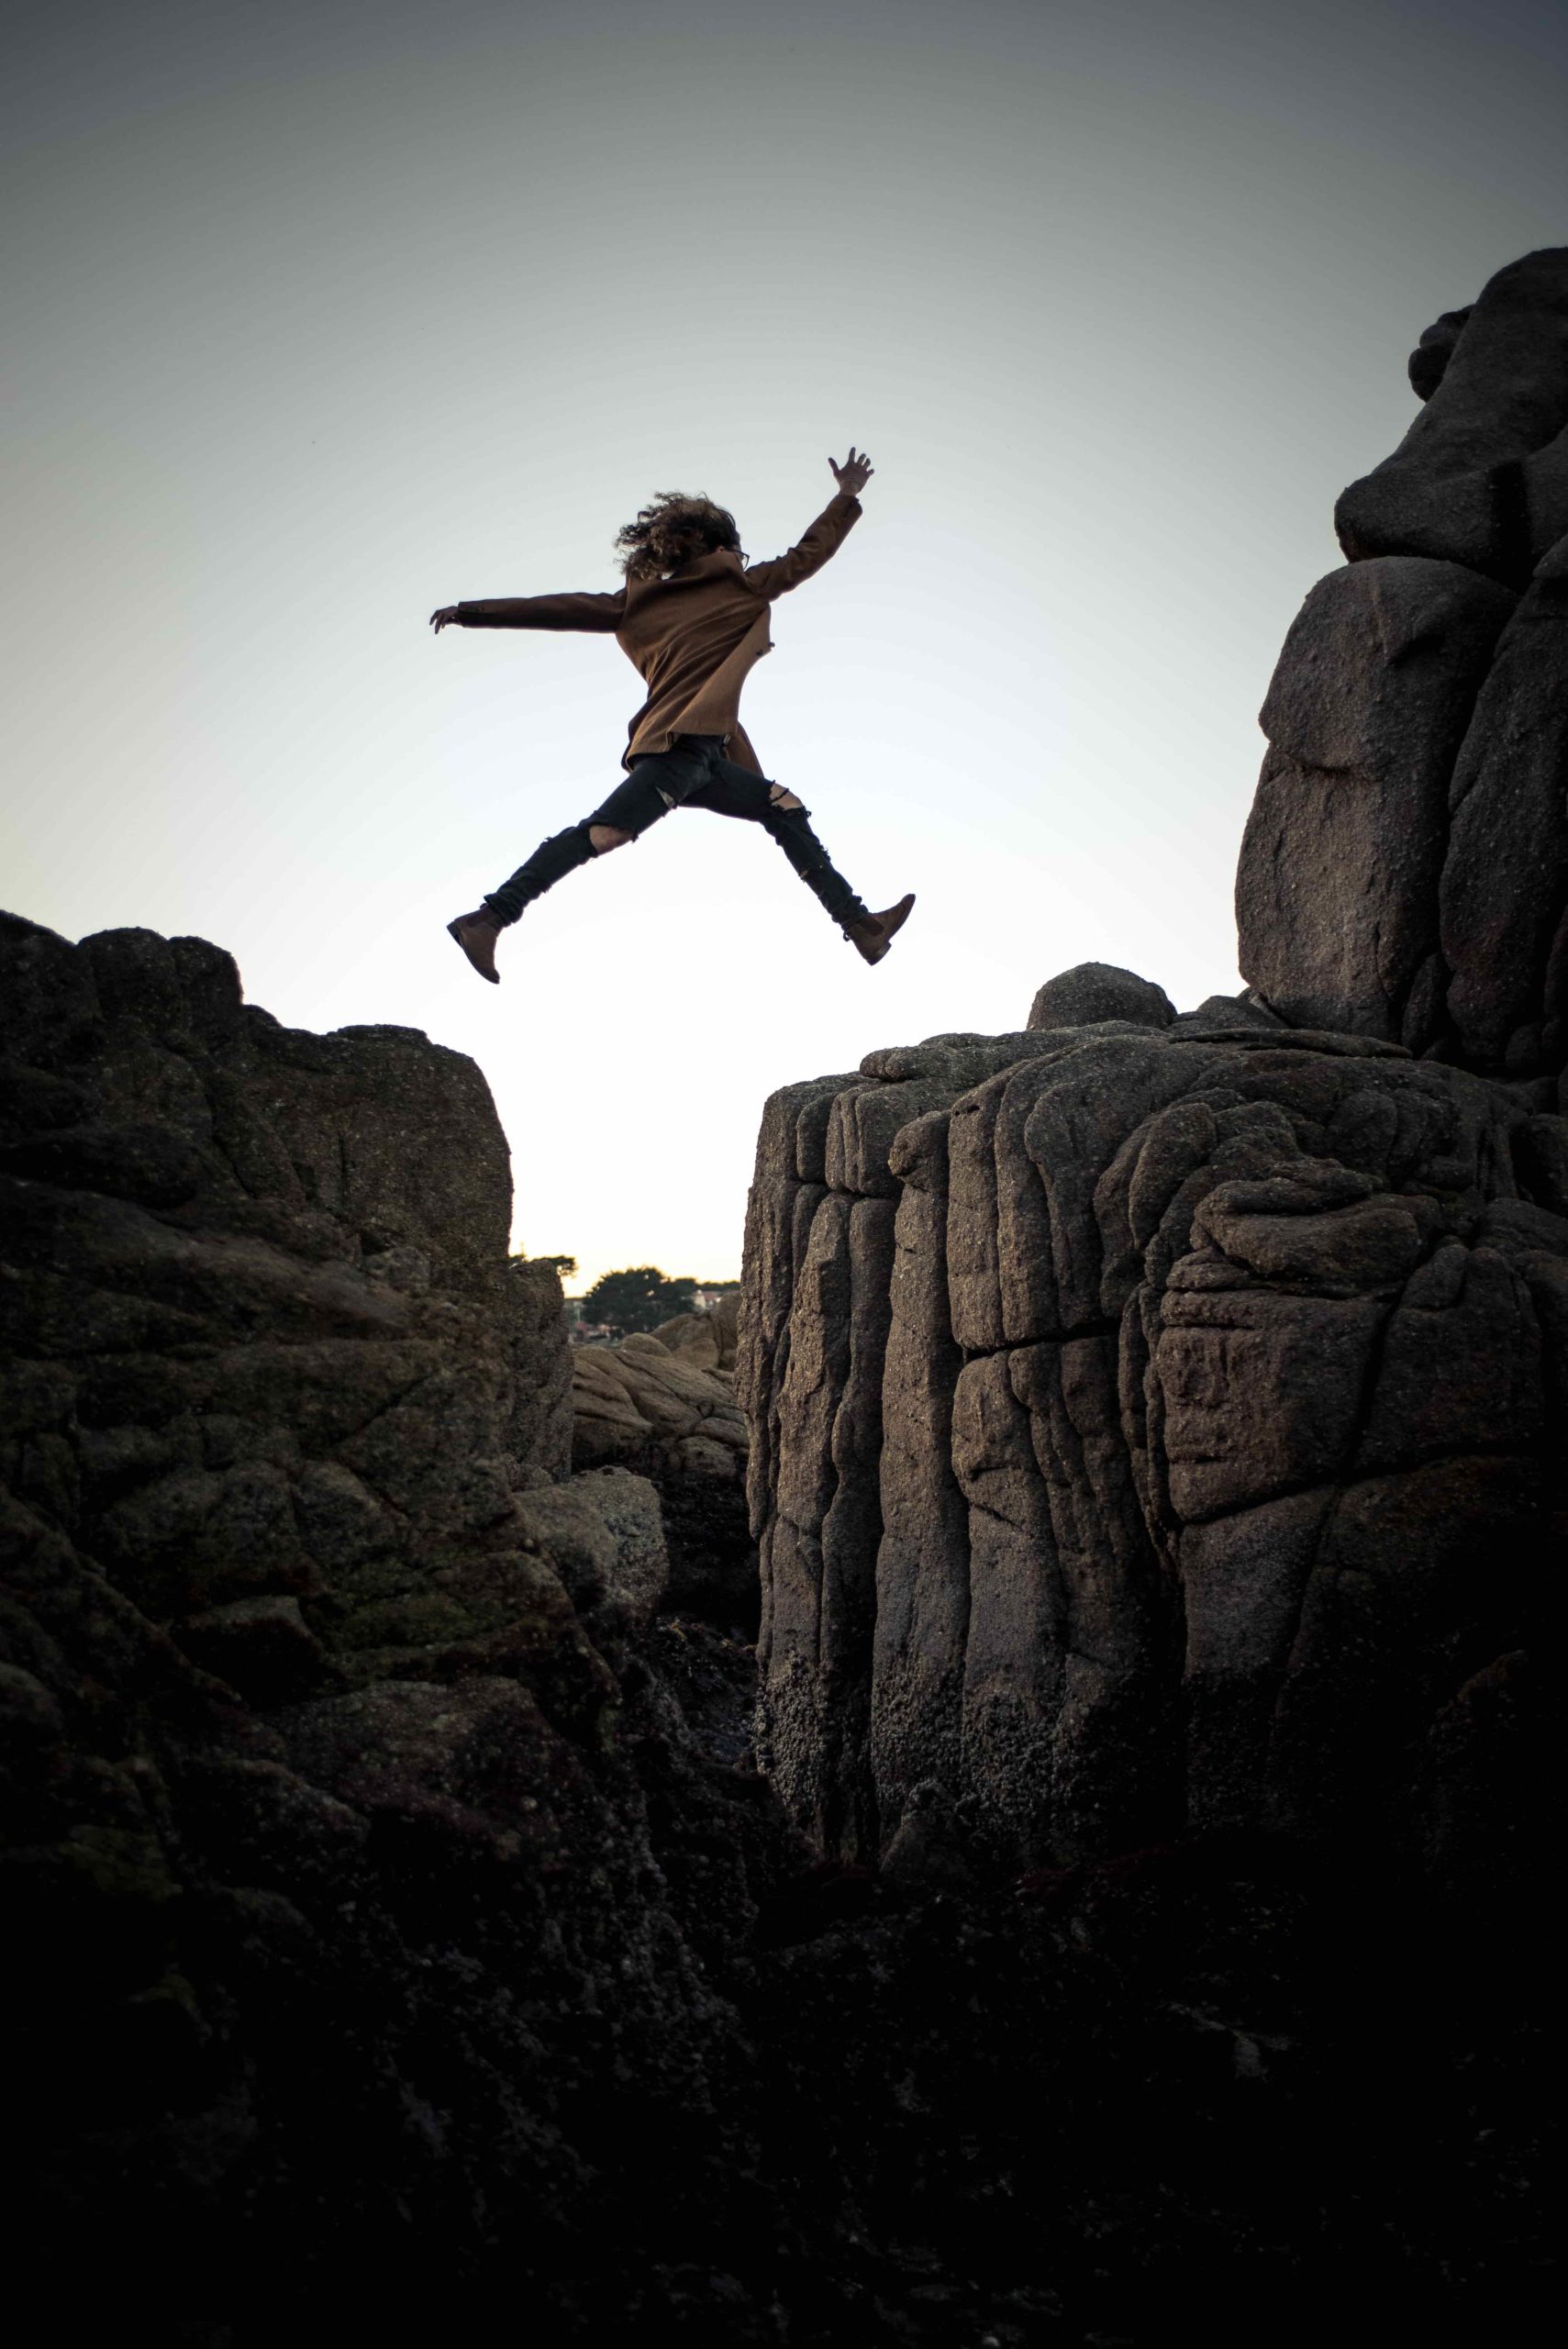 This image portrays a woman jumping across too big rocks to illustrate that she is fearless and courageous.